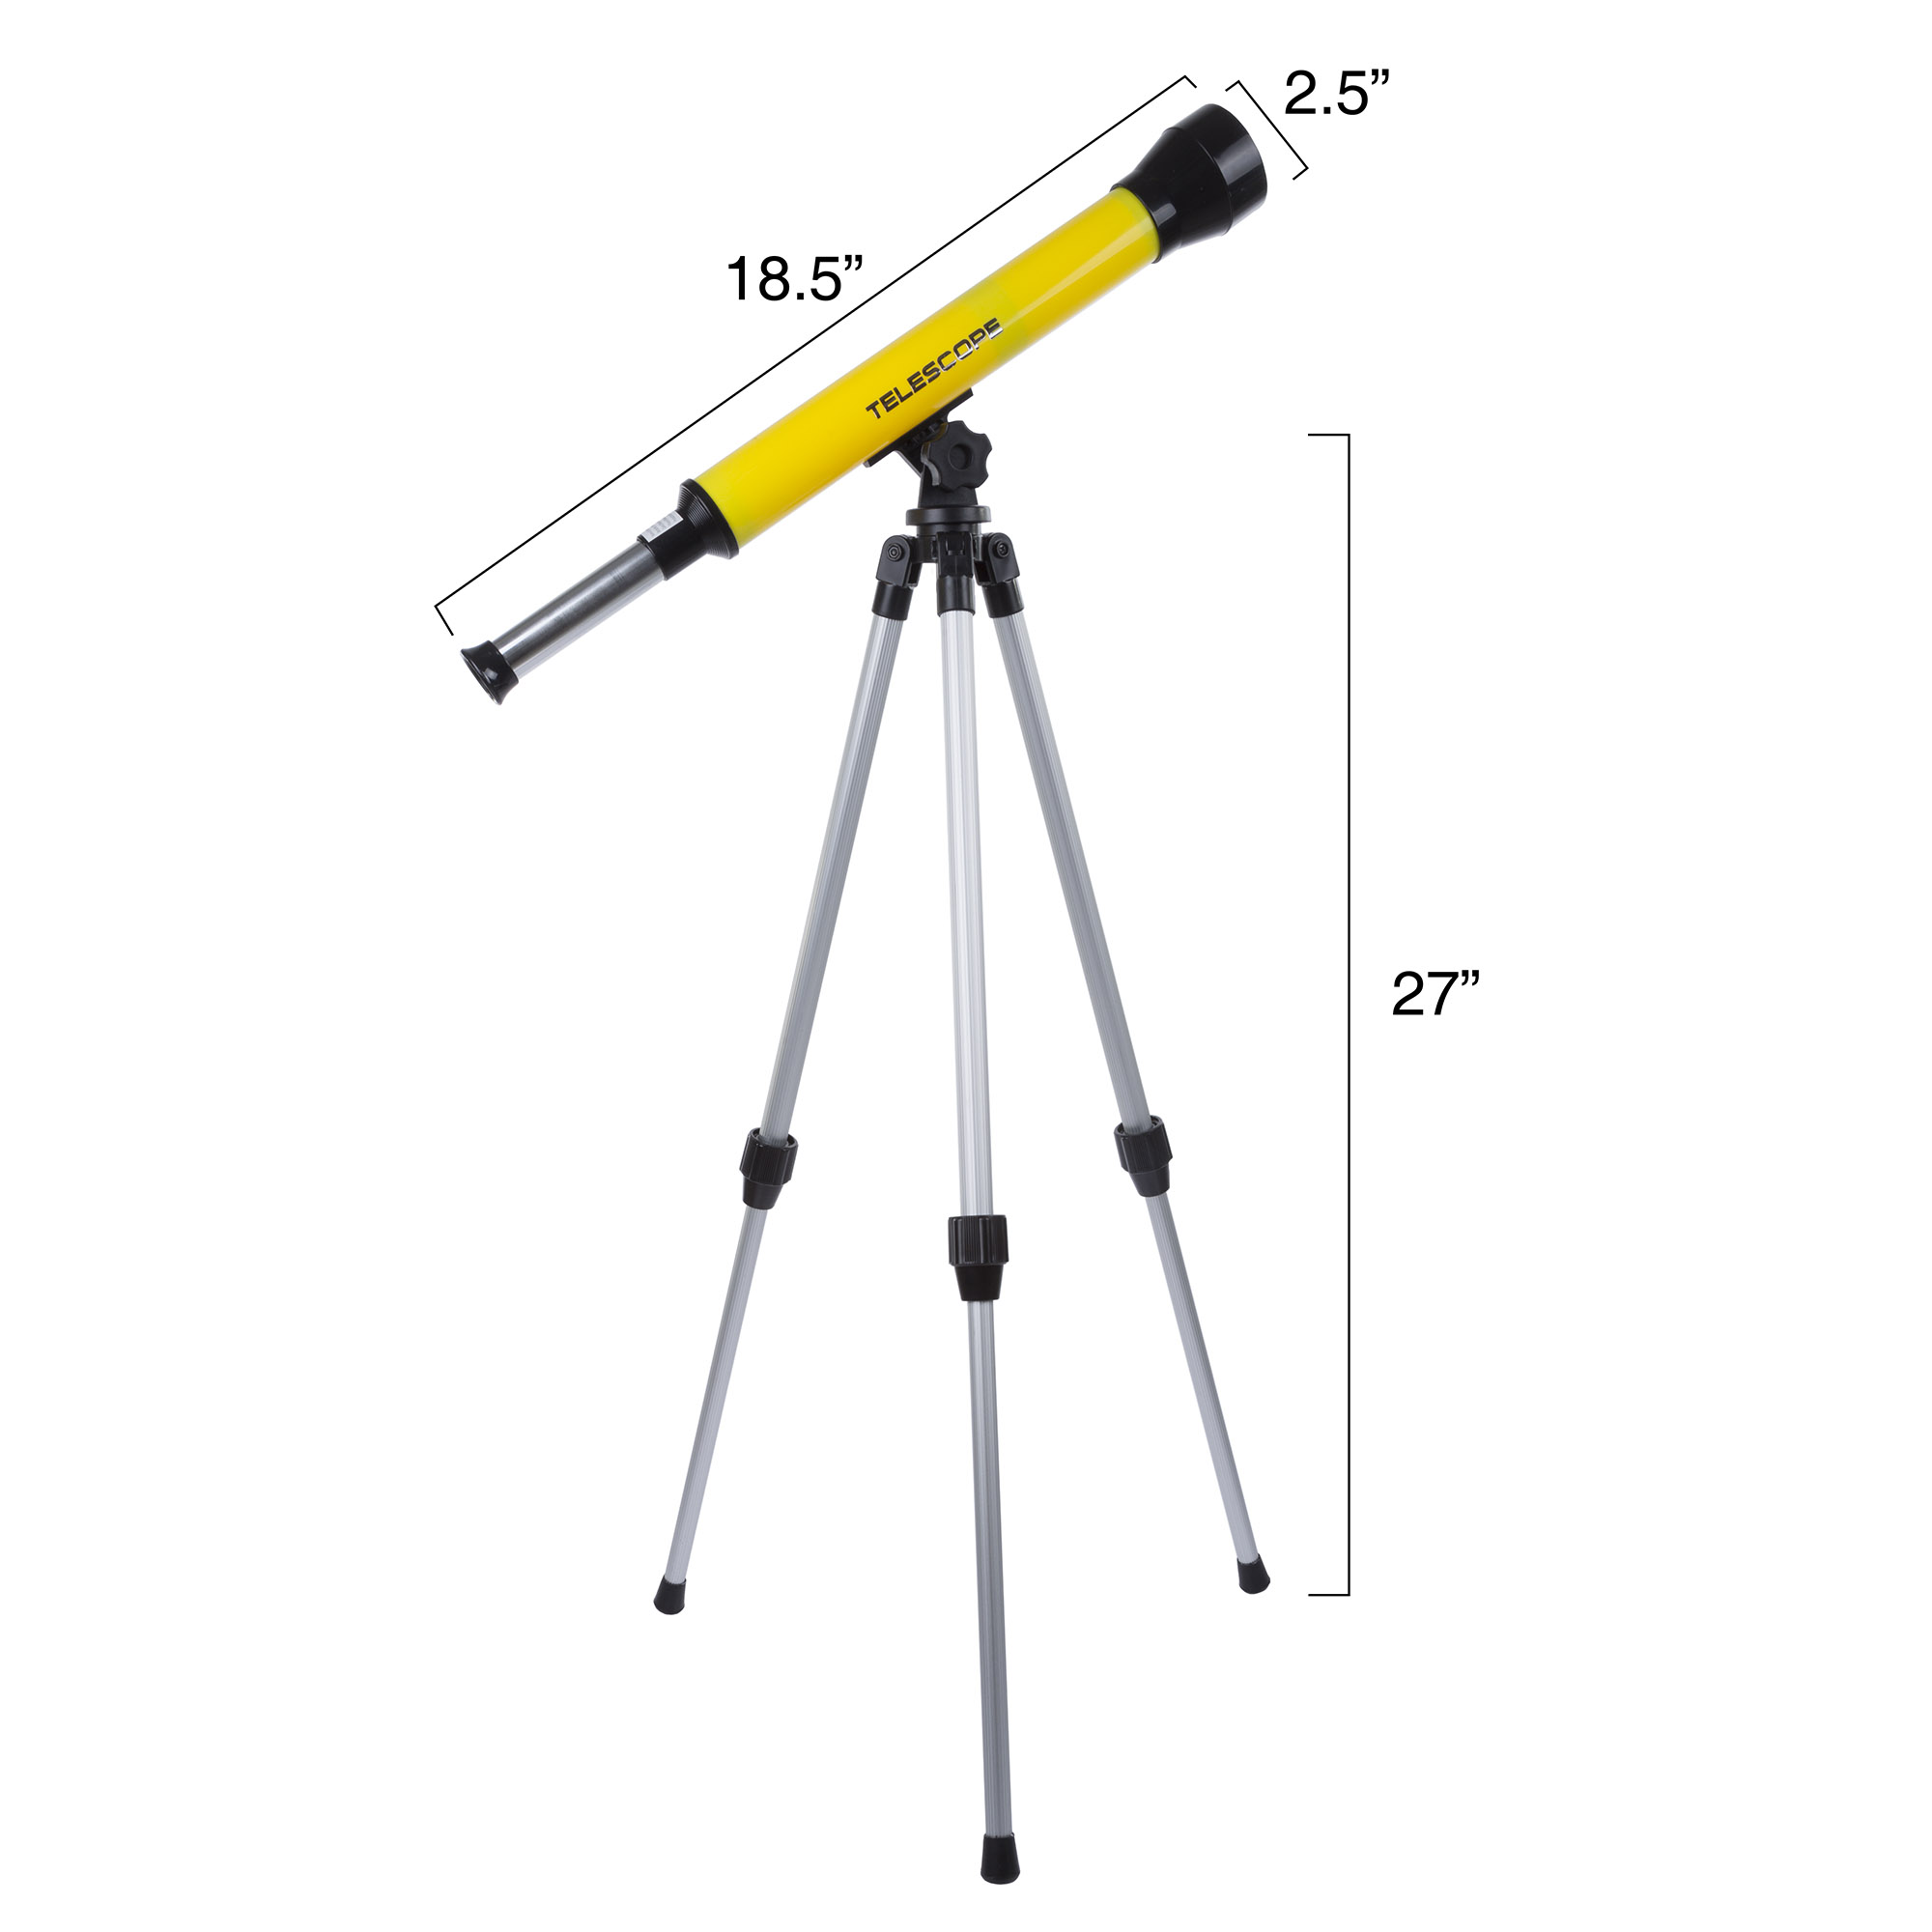 Telescope for Kids - 30x Magnification by Hey! Play! - image 2 of 4